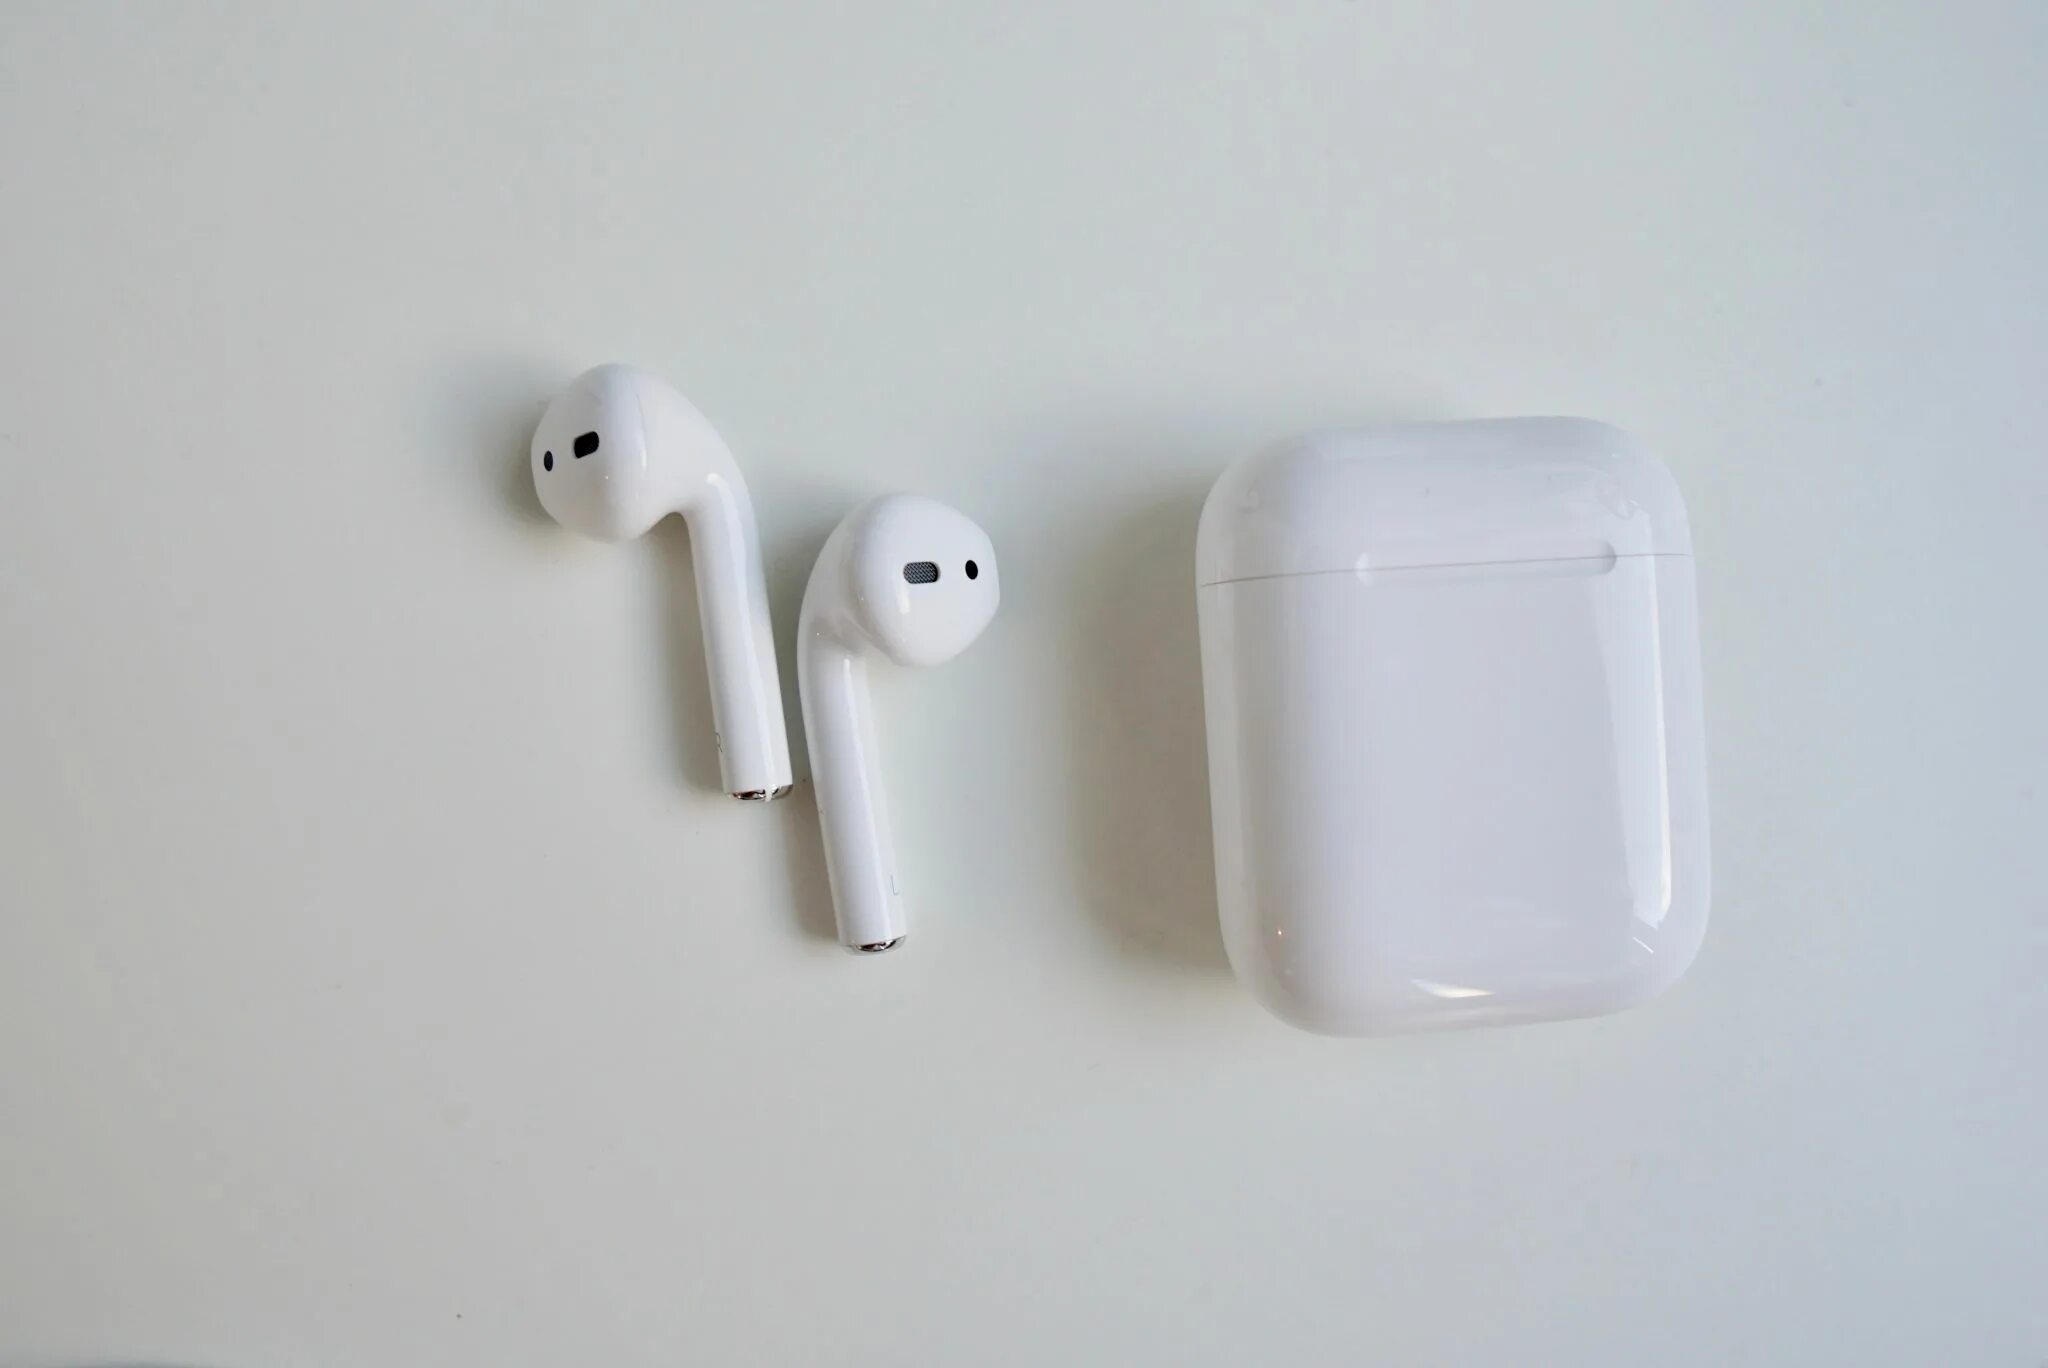 Airpods mv7n2 цены. Apple AIRPODS 2. Наушники Apple AIRPODS W/Charging Case. Apple AIRPODS 2 with Charging Case. Apple AIRPODS 1.